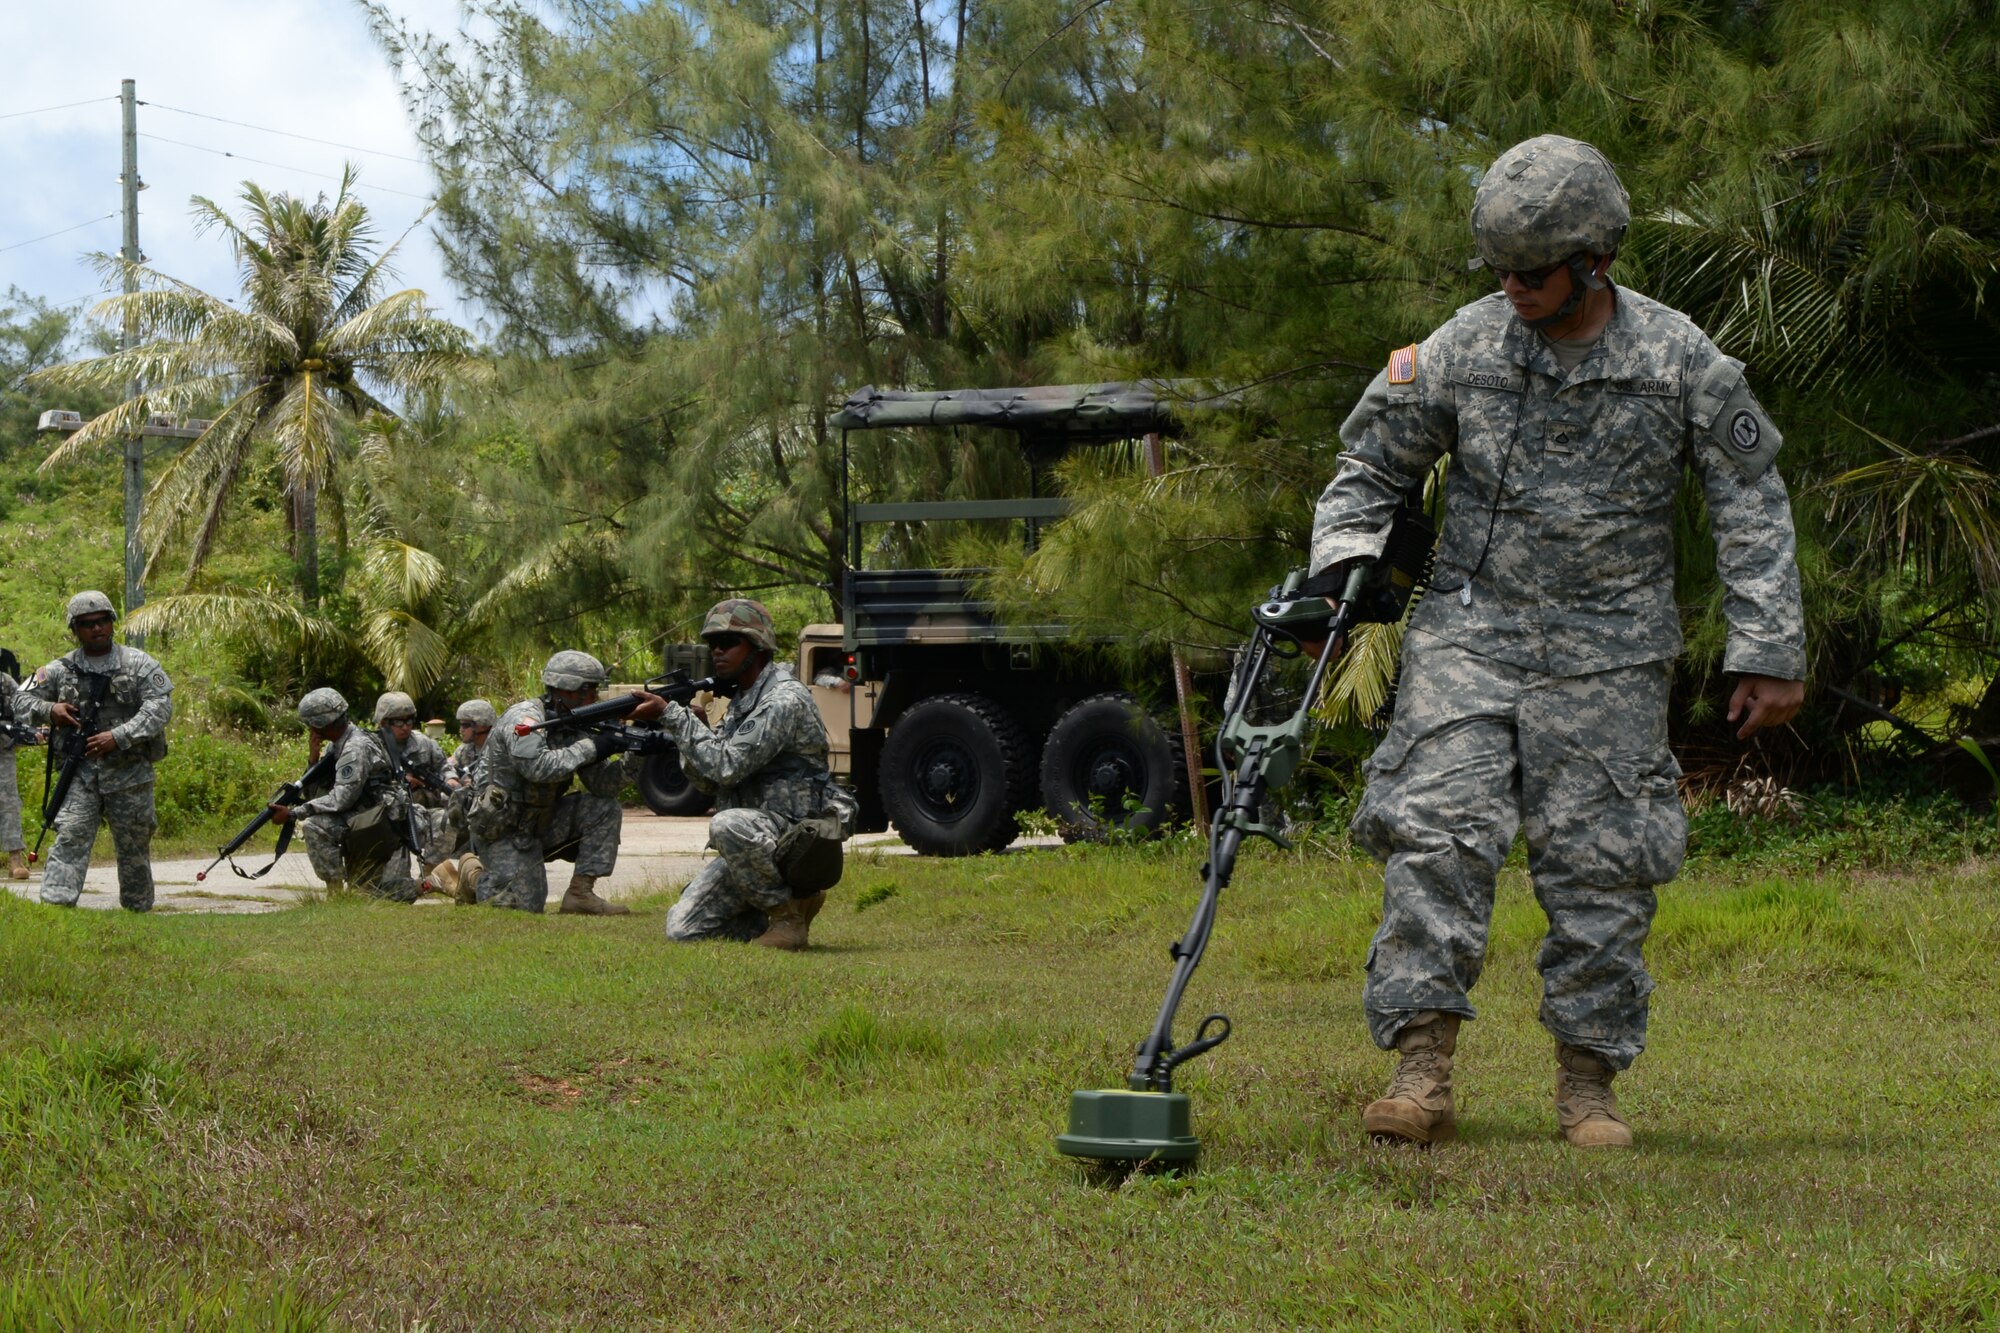 U.S. Army Reserve Pfc. Quentin Matthew Deseto, 797th Engineer Company (Vertical) mine sweeper, clears a training area during an exercise event June 11, 2014, on Andersen South, Guam. The training consisted of classroom instruction, demonstrations and scenario based training. (U.S. Air Force photo by Airman 1st Class Amanda Morris/Released)